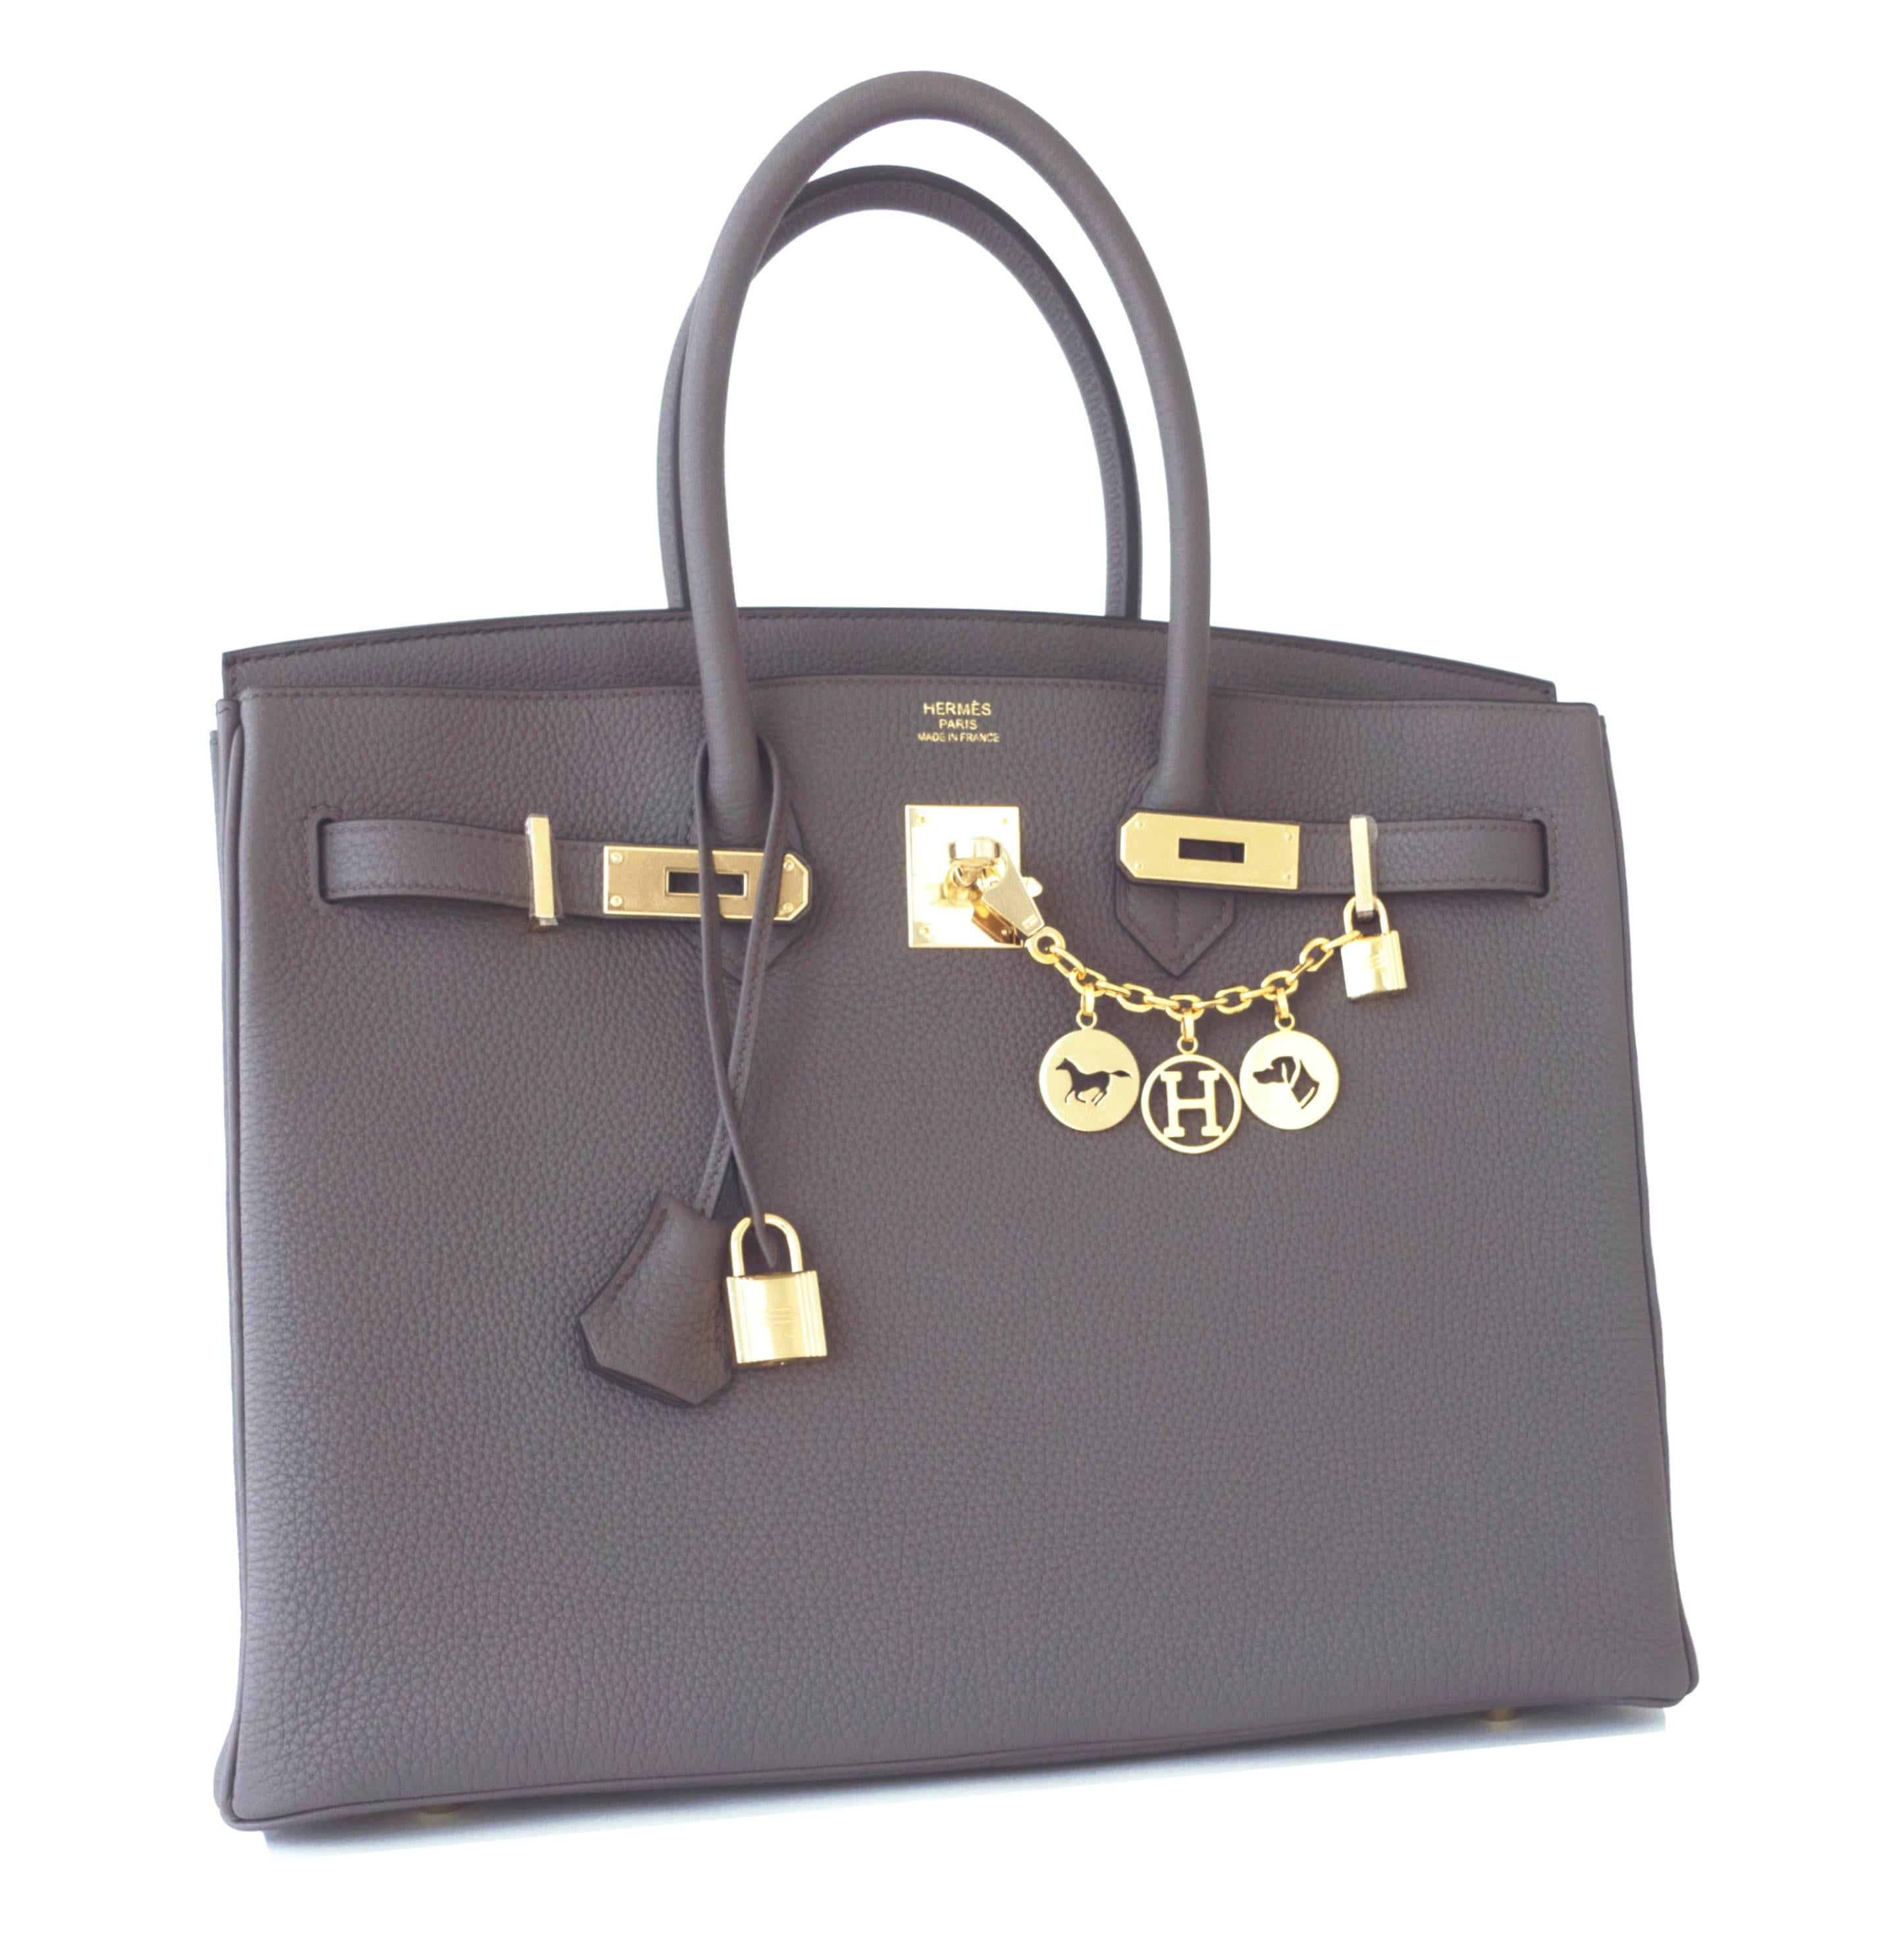 Hermes Etain Togo Tin Grey 35cm Birkin Gold Hardware GHW X Stamp 
Store fresh. Pristine condition (with plastic on hardware). 
Just purchased from Hermes store in 2016 with new interior X Stamp. 
Perfect gift! Comes with keys, lock, clochette, a